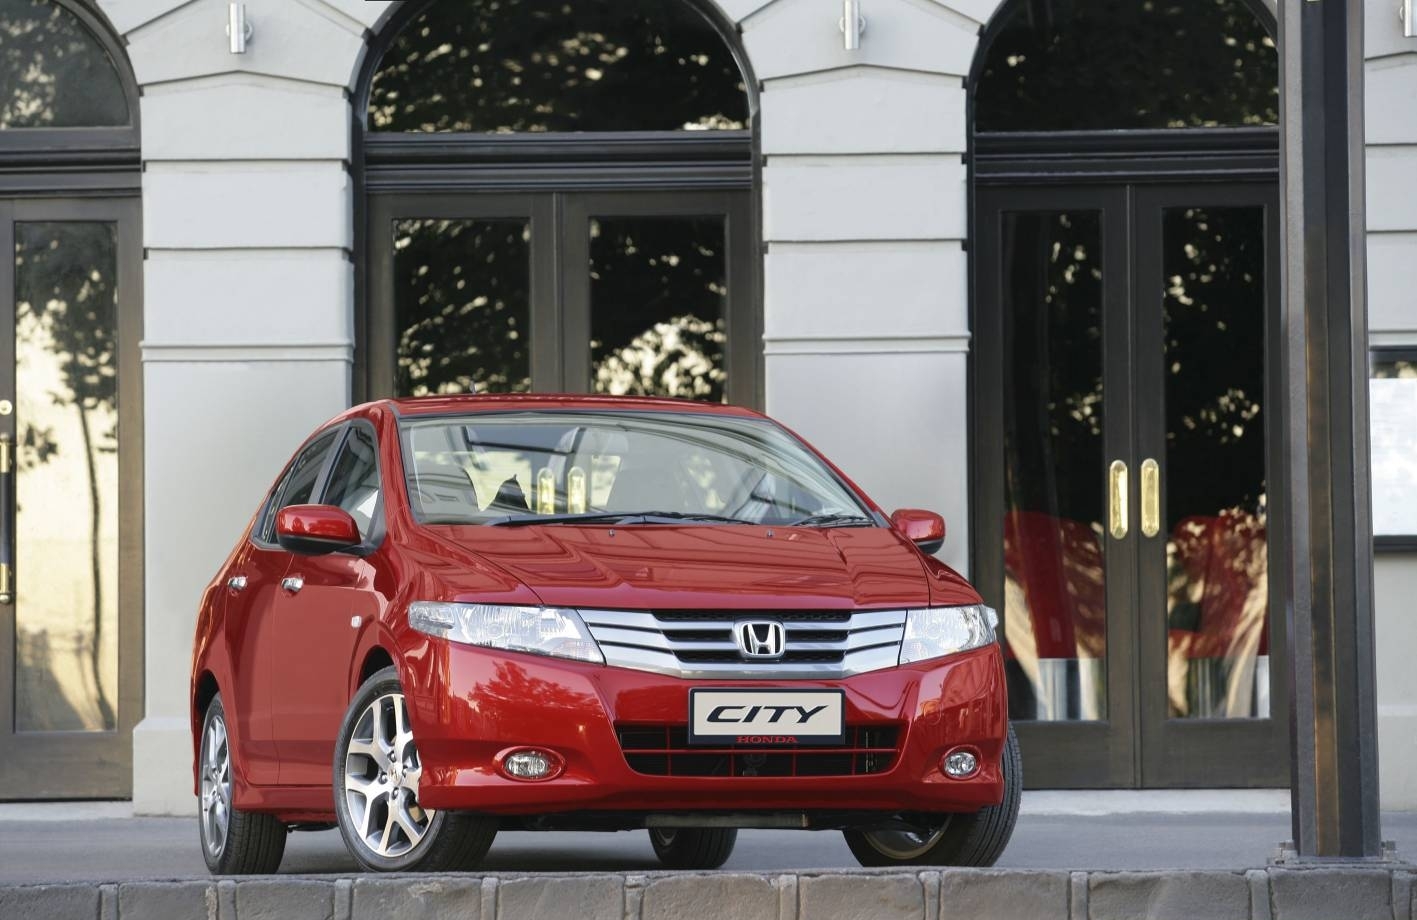 Honda City 2020 Prices In Pakistan Pictures Reviews